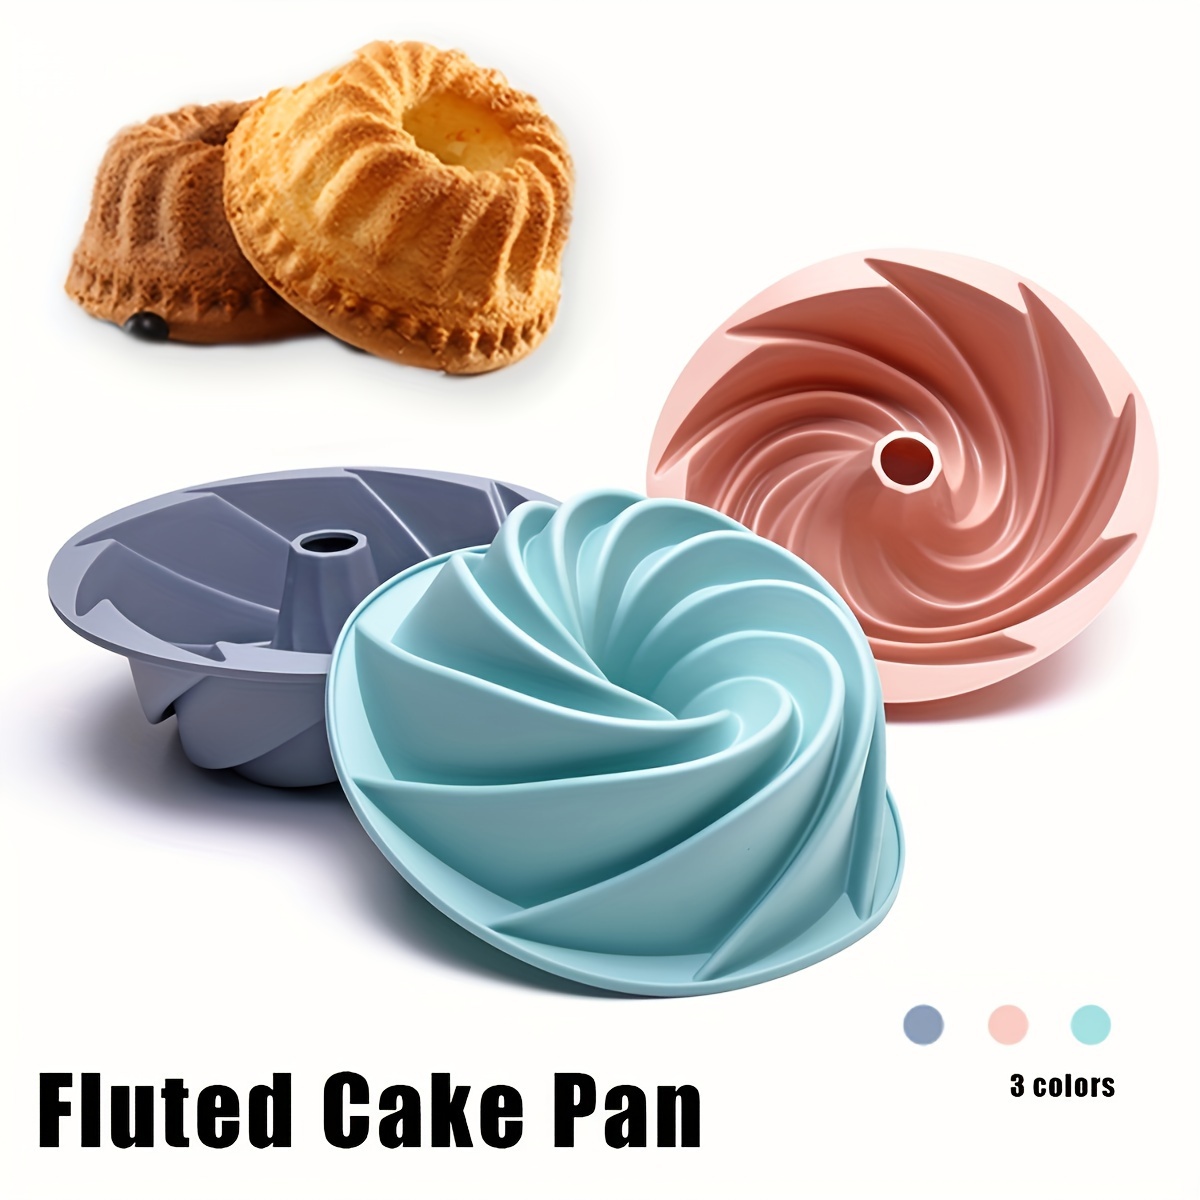 

1pc, Silicone Bundt Pan, 9.5''x3.2'', Heritage Bundtlette Cake Mold, For Fluted Tube Cake Making, Baking Tools, Kitchen Gadgets, Kitchen Accessories